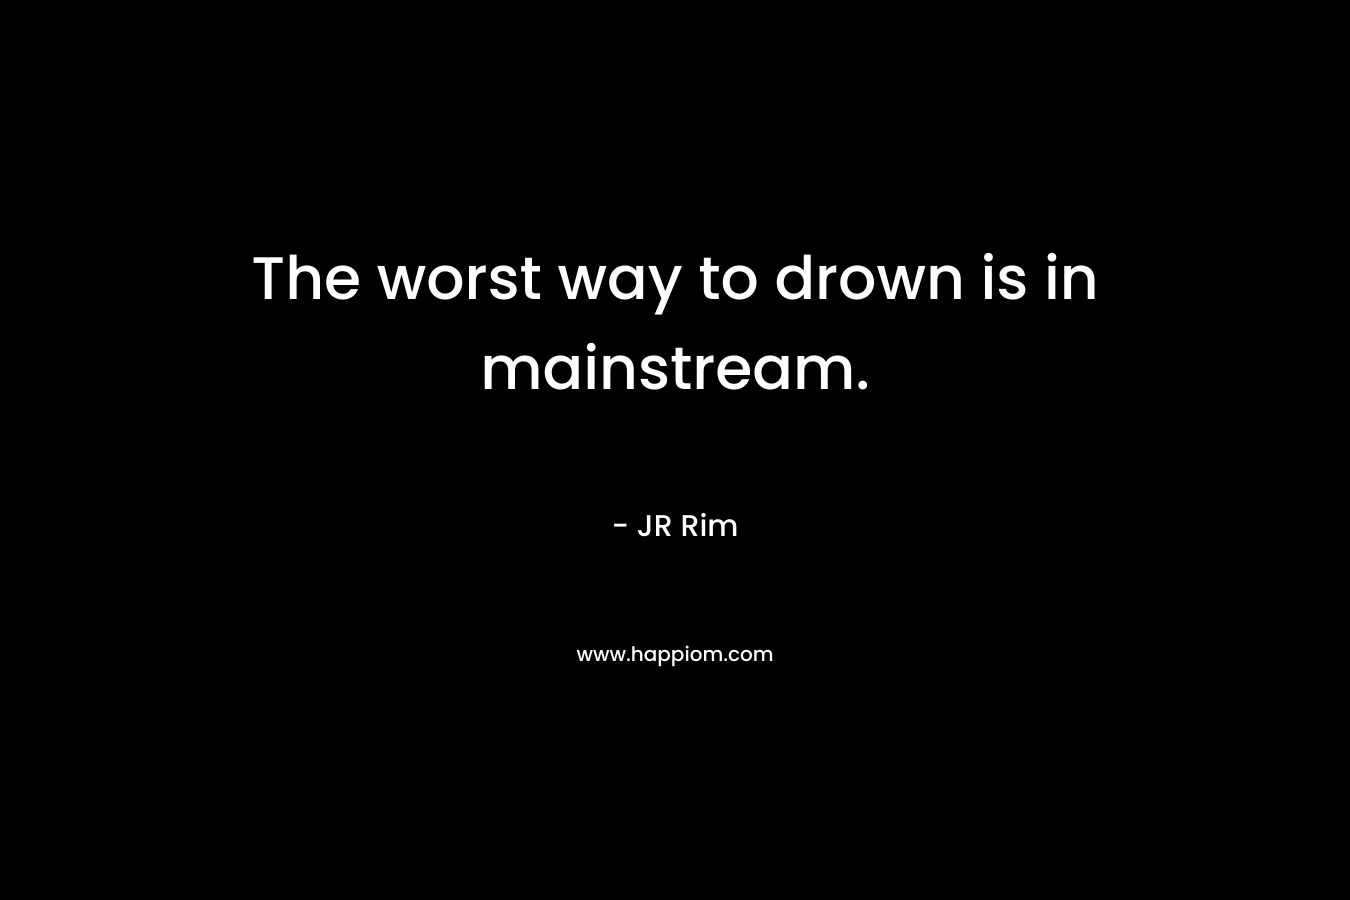 The worst way to drown is in mainstream. – JR Rim